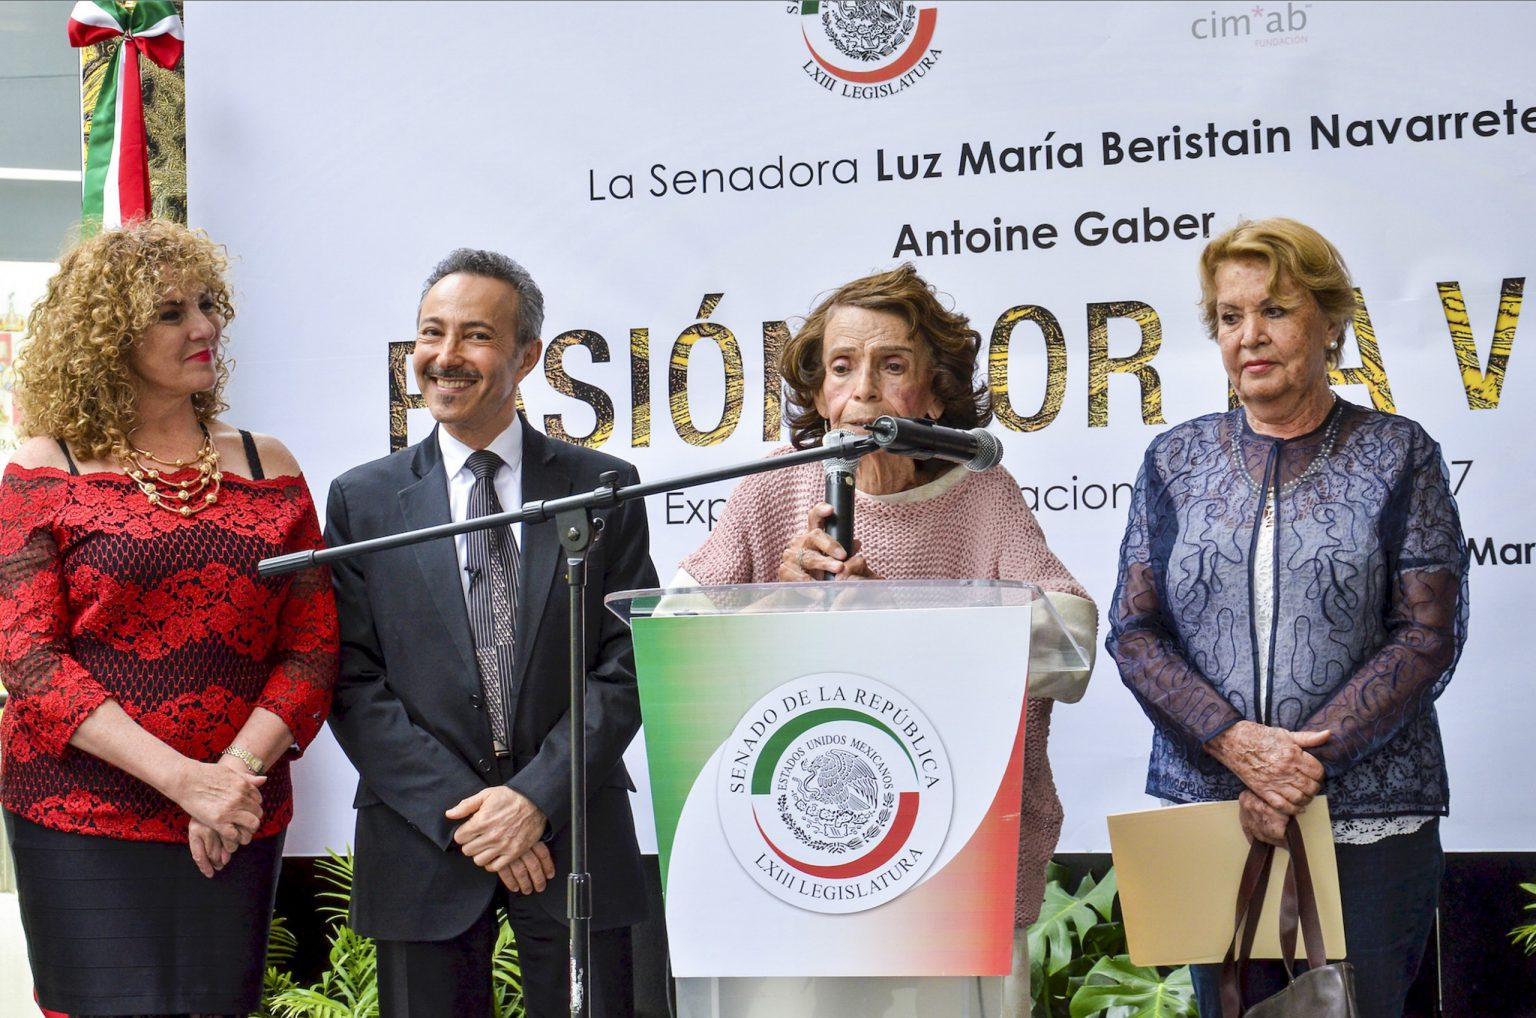 During the Senate inauguration speeches, the most famous Historian, cultural researcher and Art Critic from Mexico Prof. Berta Taracena made the official announcement, inviting Antoine Gaber to become the first Canadian Artists ever, to join the prestigious artist group of the “MIRADA COLOSAL”.